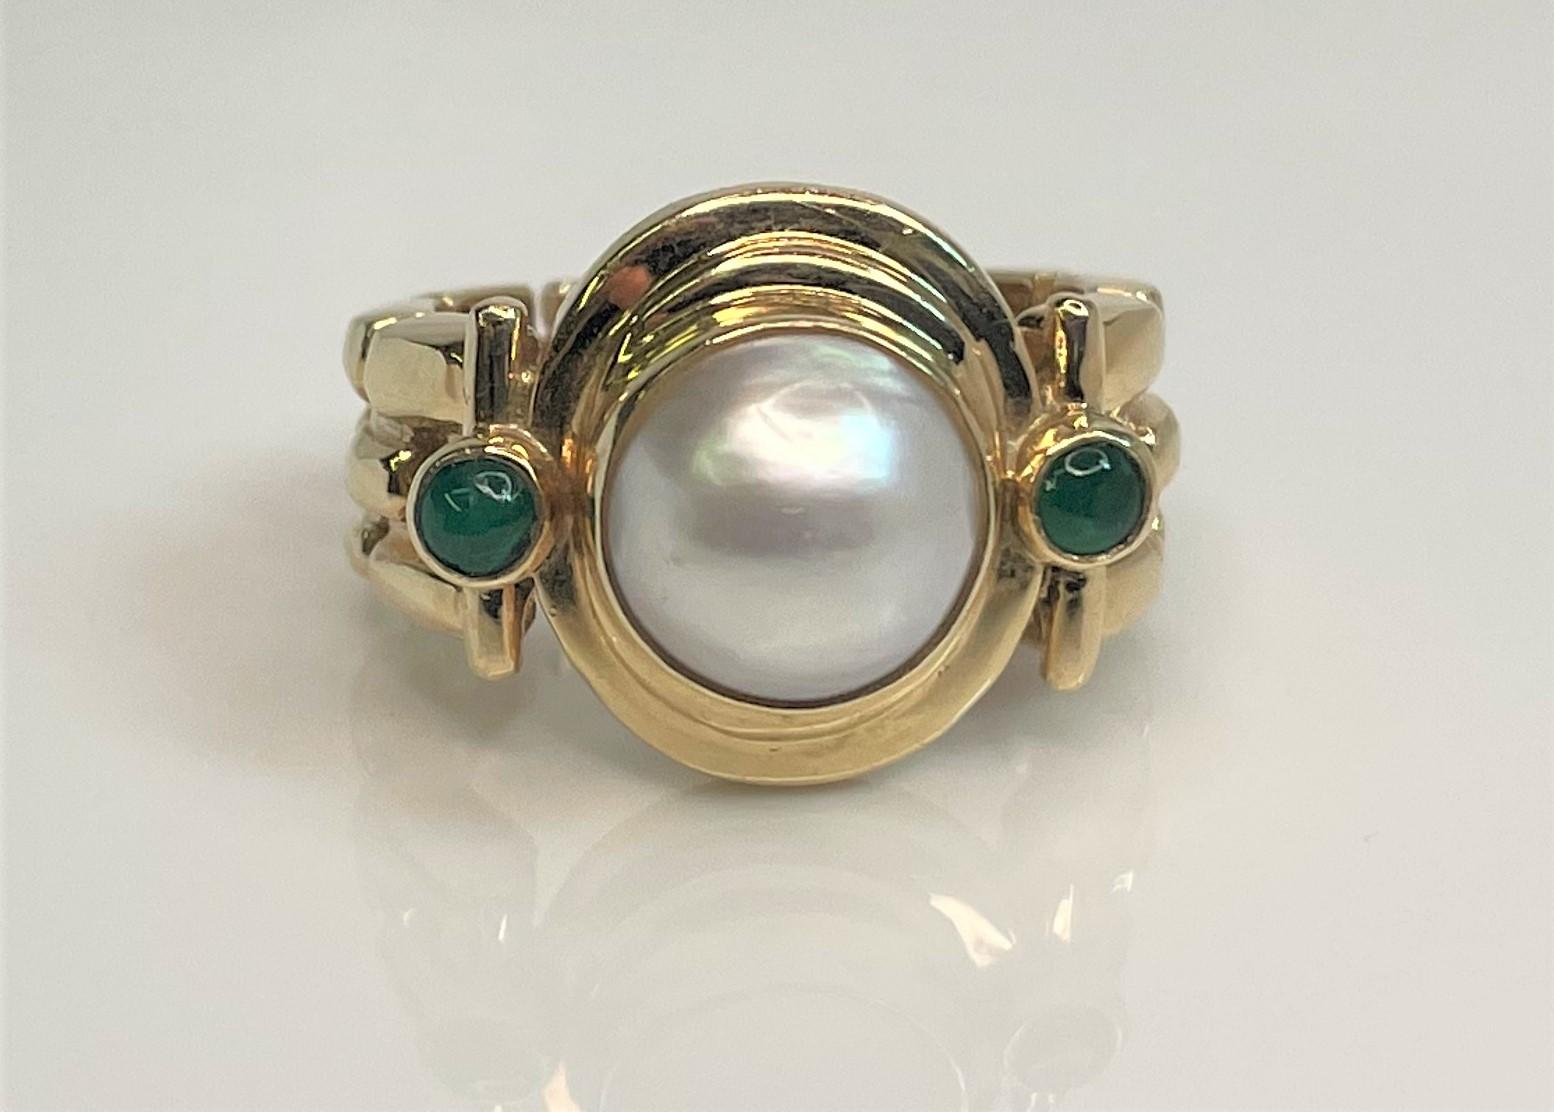 Beautiful 14 karat yellow gold 'chain link' design band with round head.
8.5-9.0mm cultured mabe light grey pearl center.
2 round cabochon emeralds on each side of pearl center.  
Stamped 